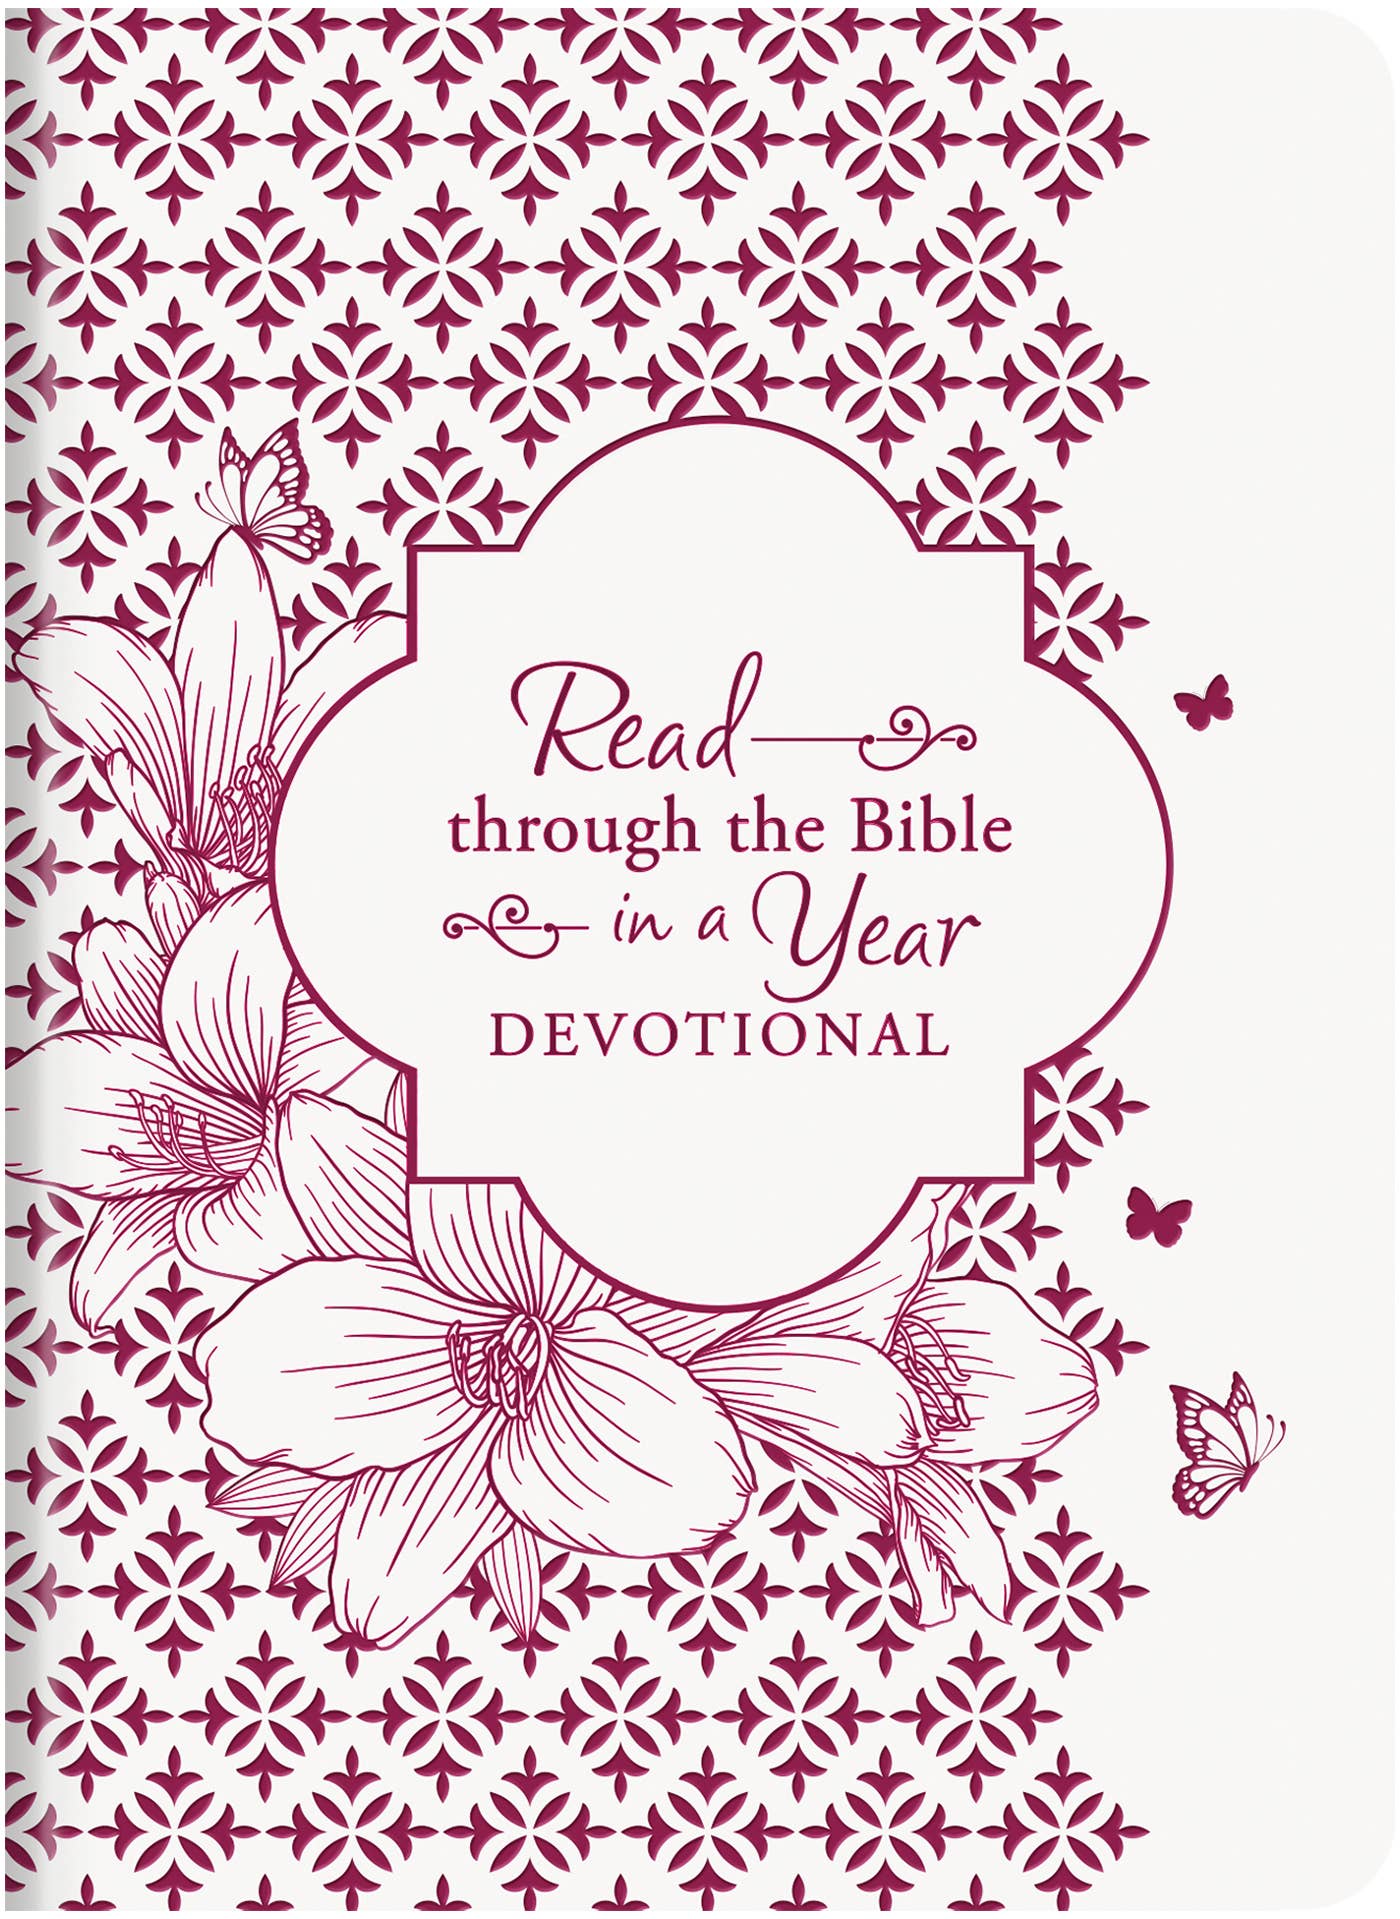 Read through the Bible in a Year Devotional